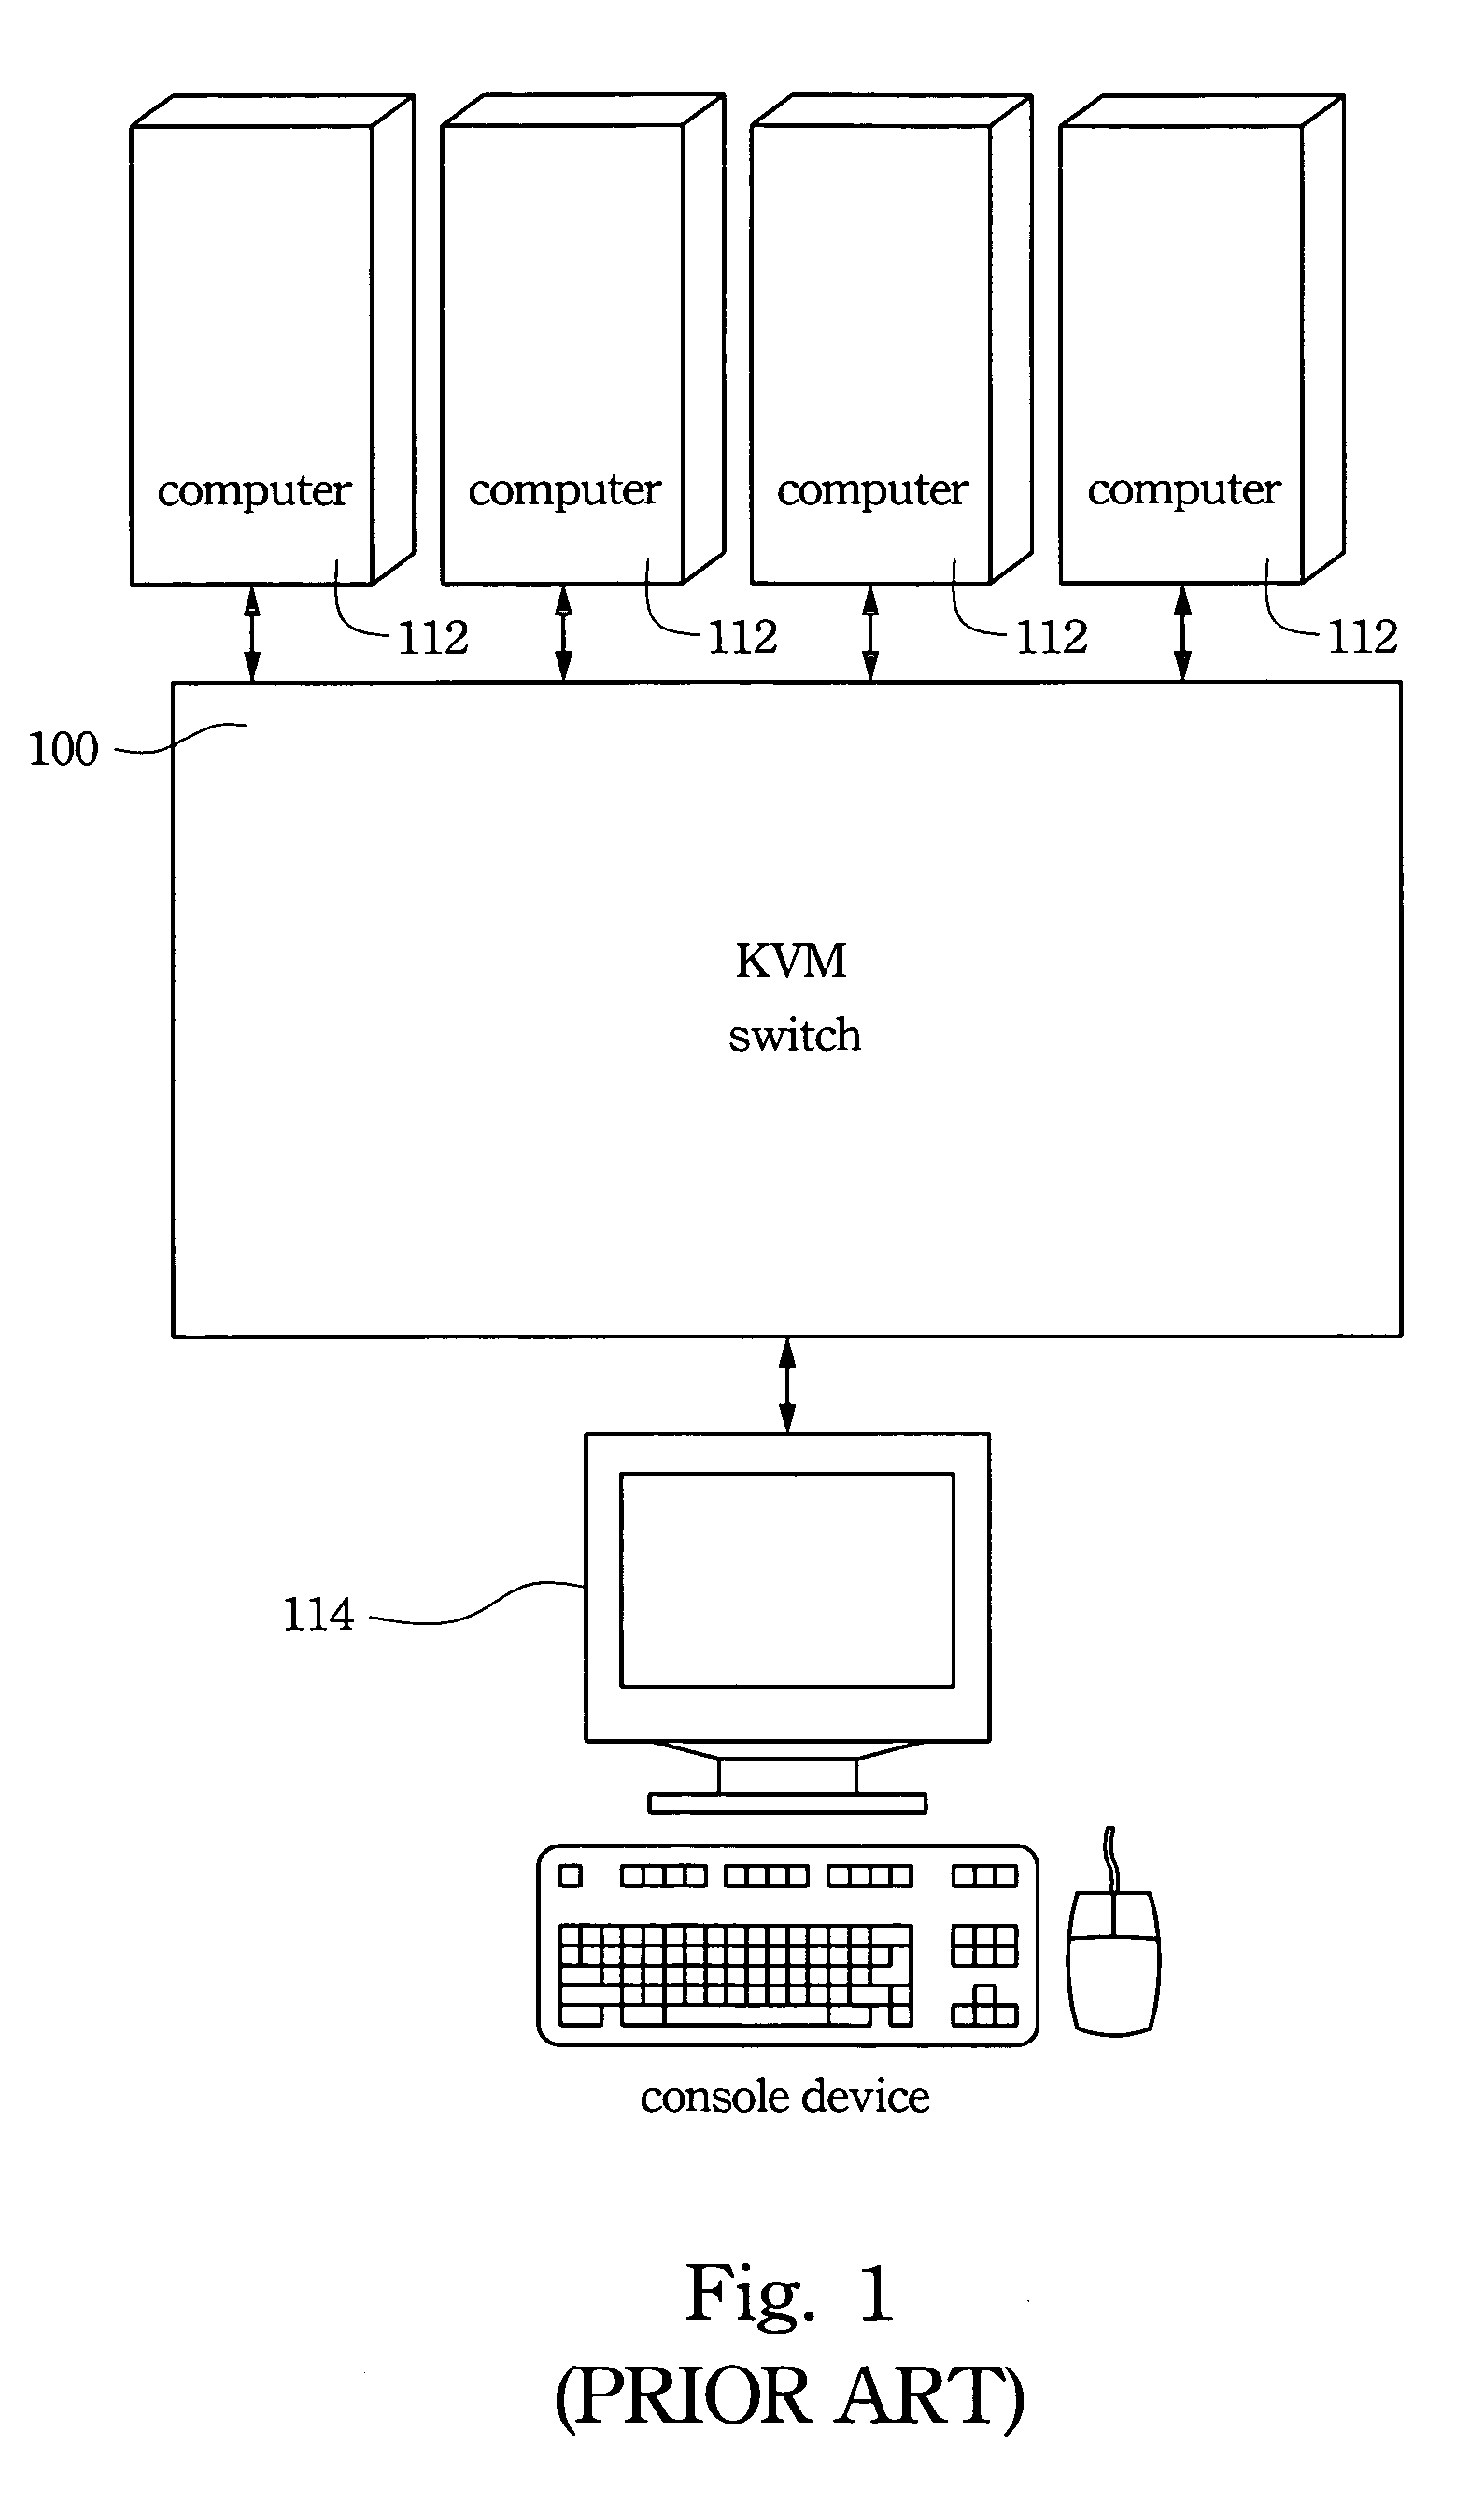 KVM switch supporting IPMI communications with computing devices